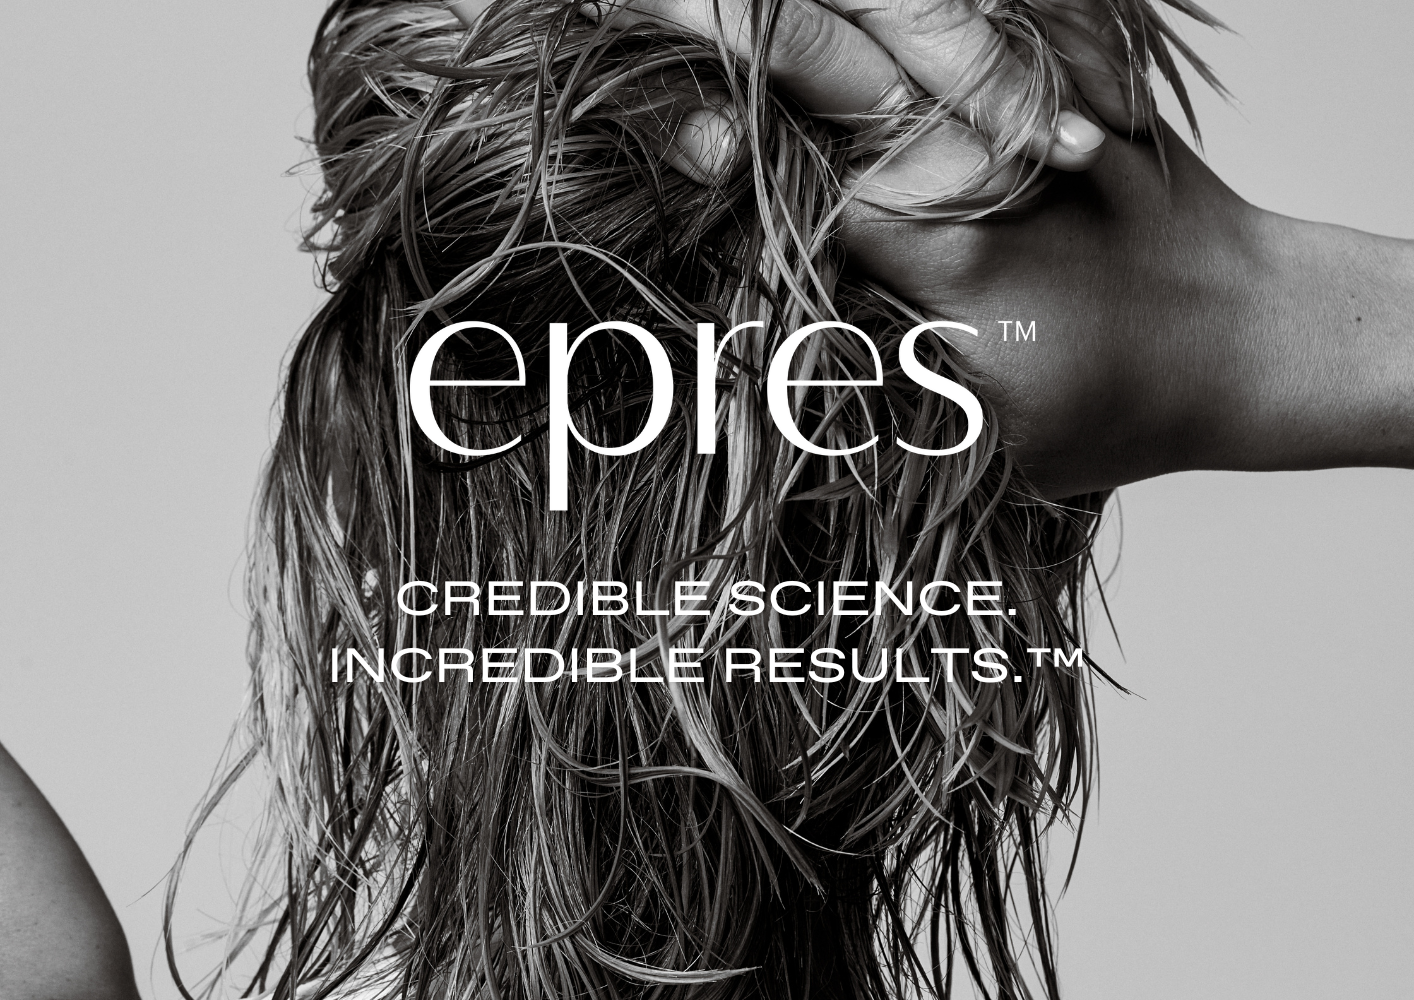 epres™ - Credible Science. Incredible Results